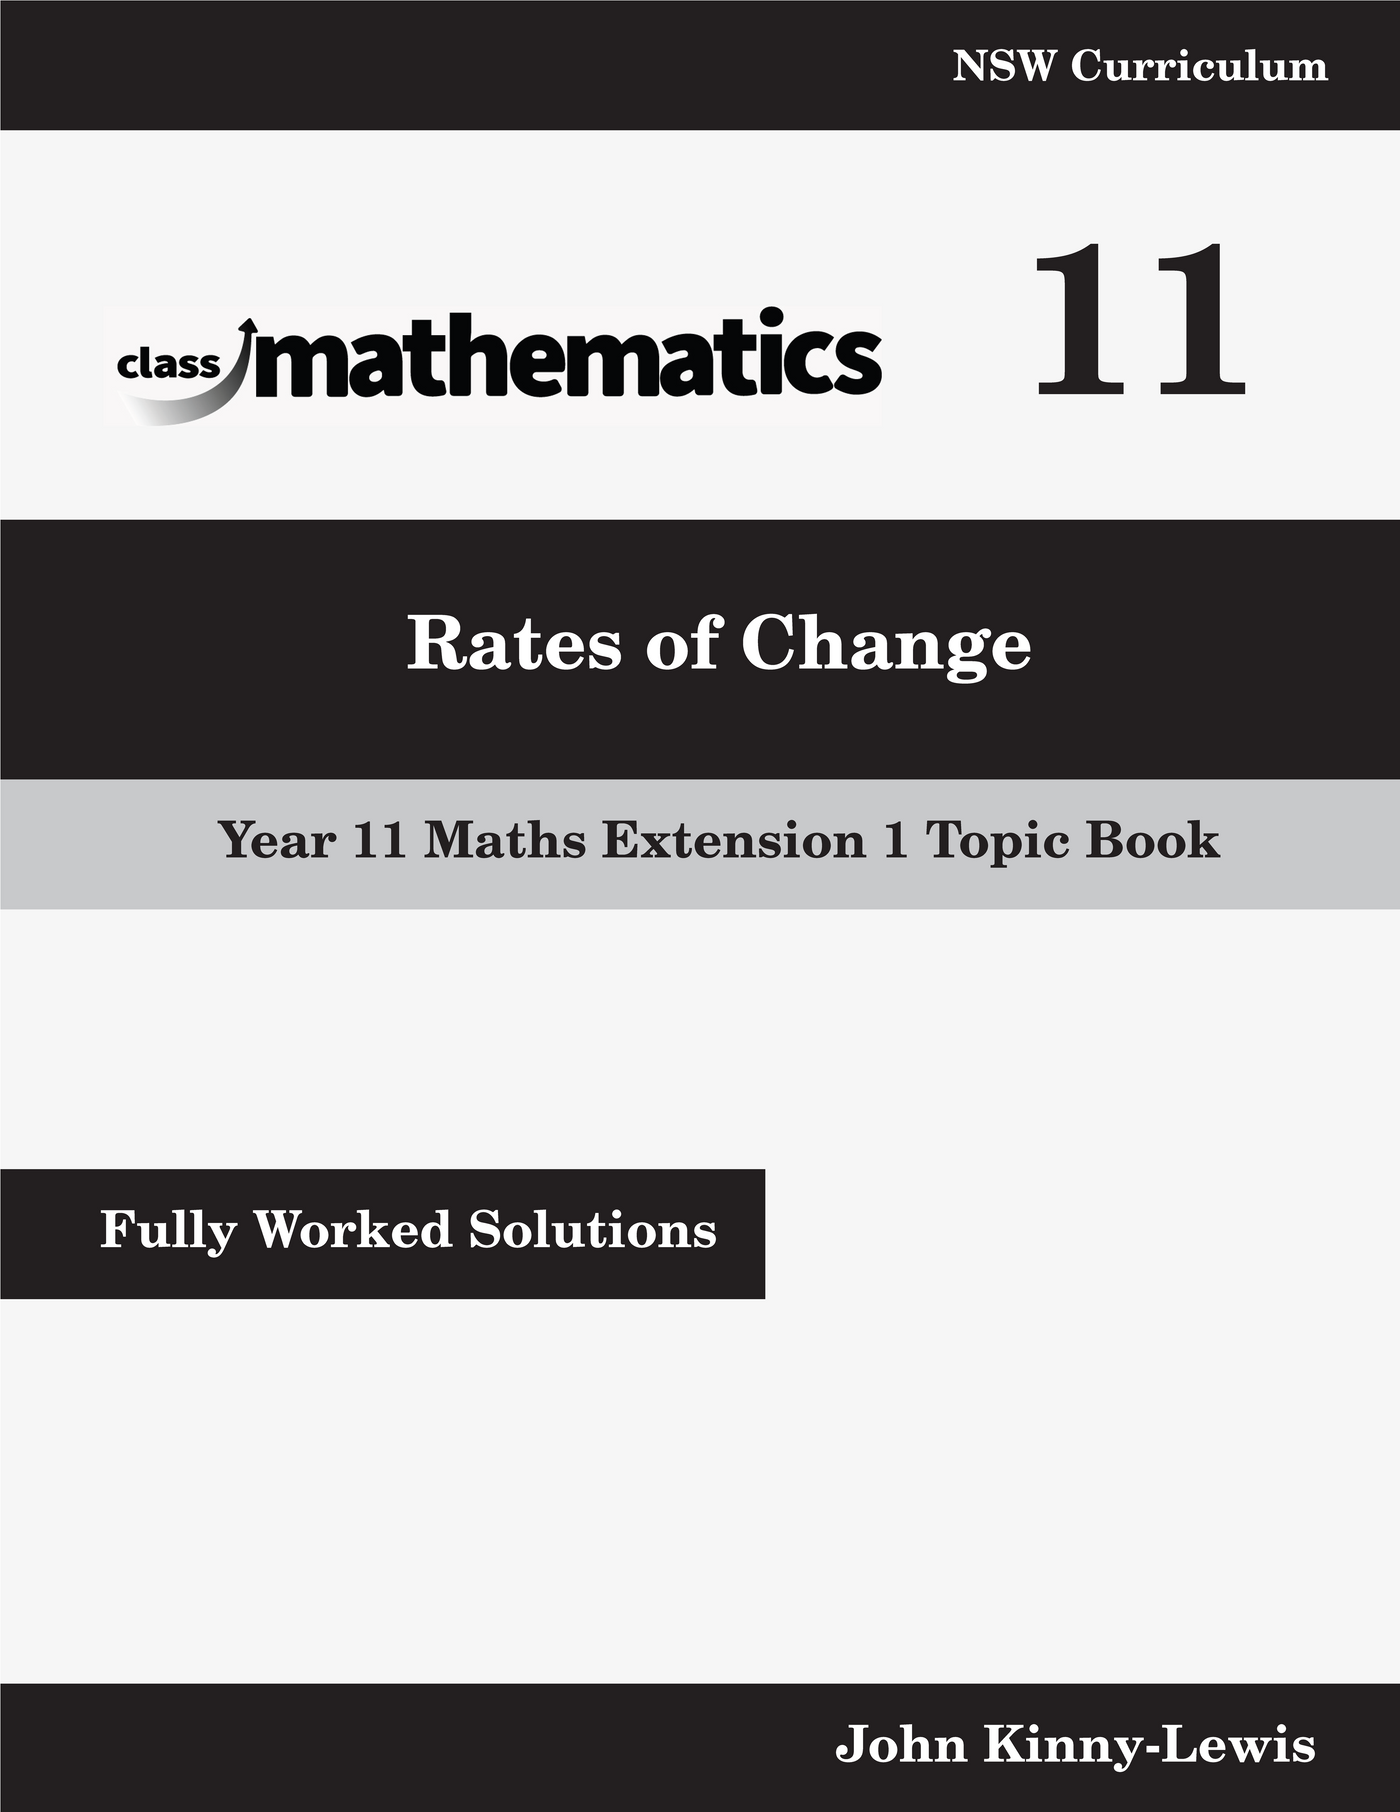 NSW Year 11 Maths Extension 1 - Rates of Change